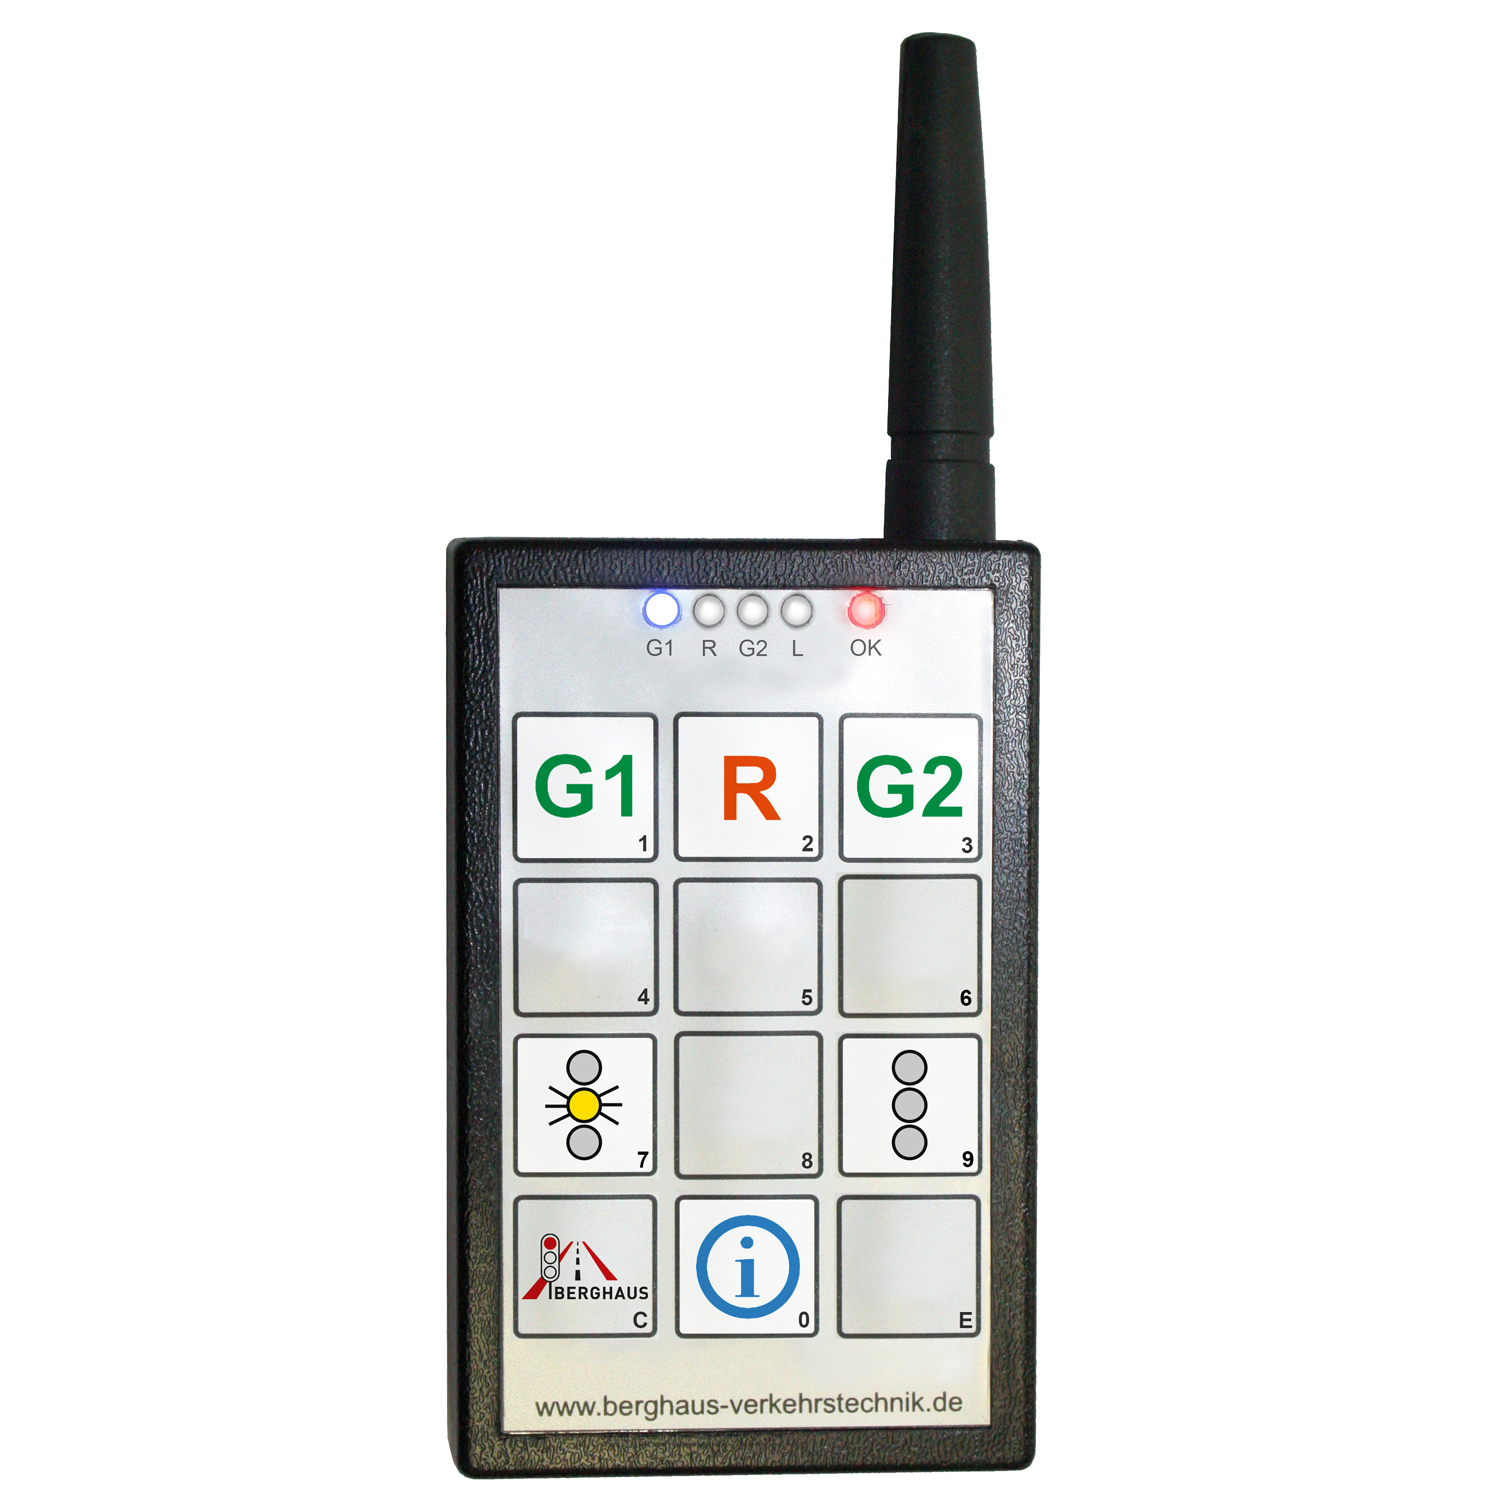 Eight-channel handheld transmitter with feedback MBA